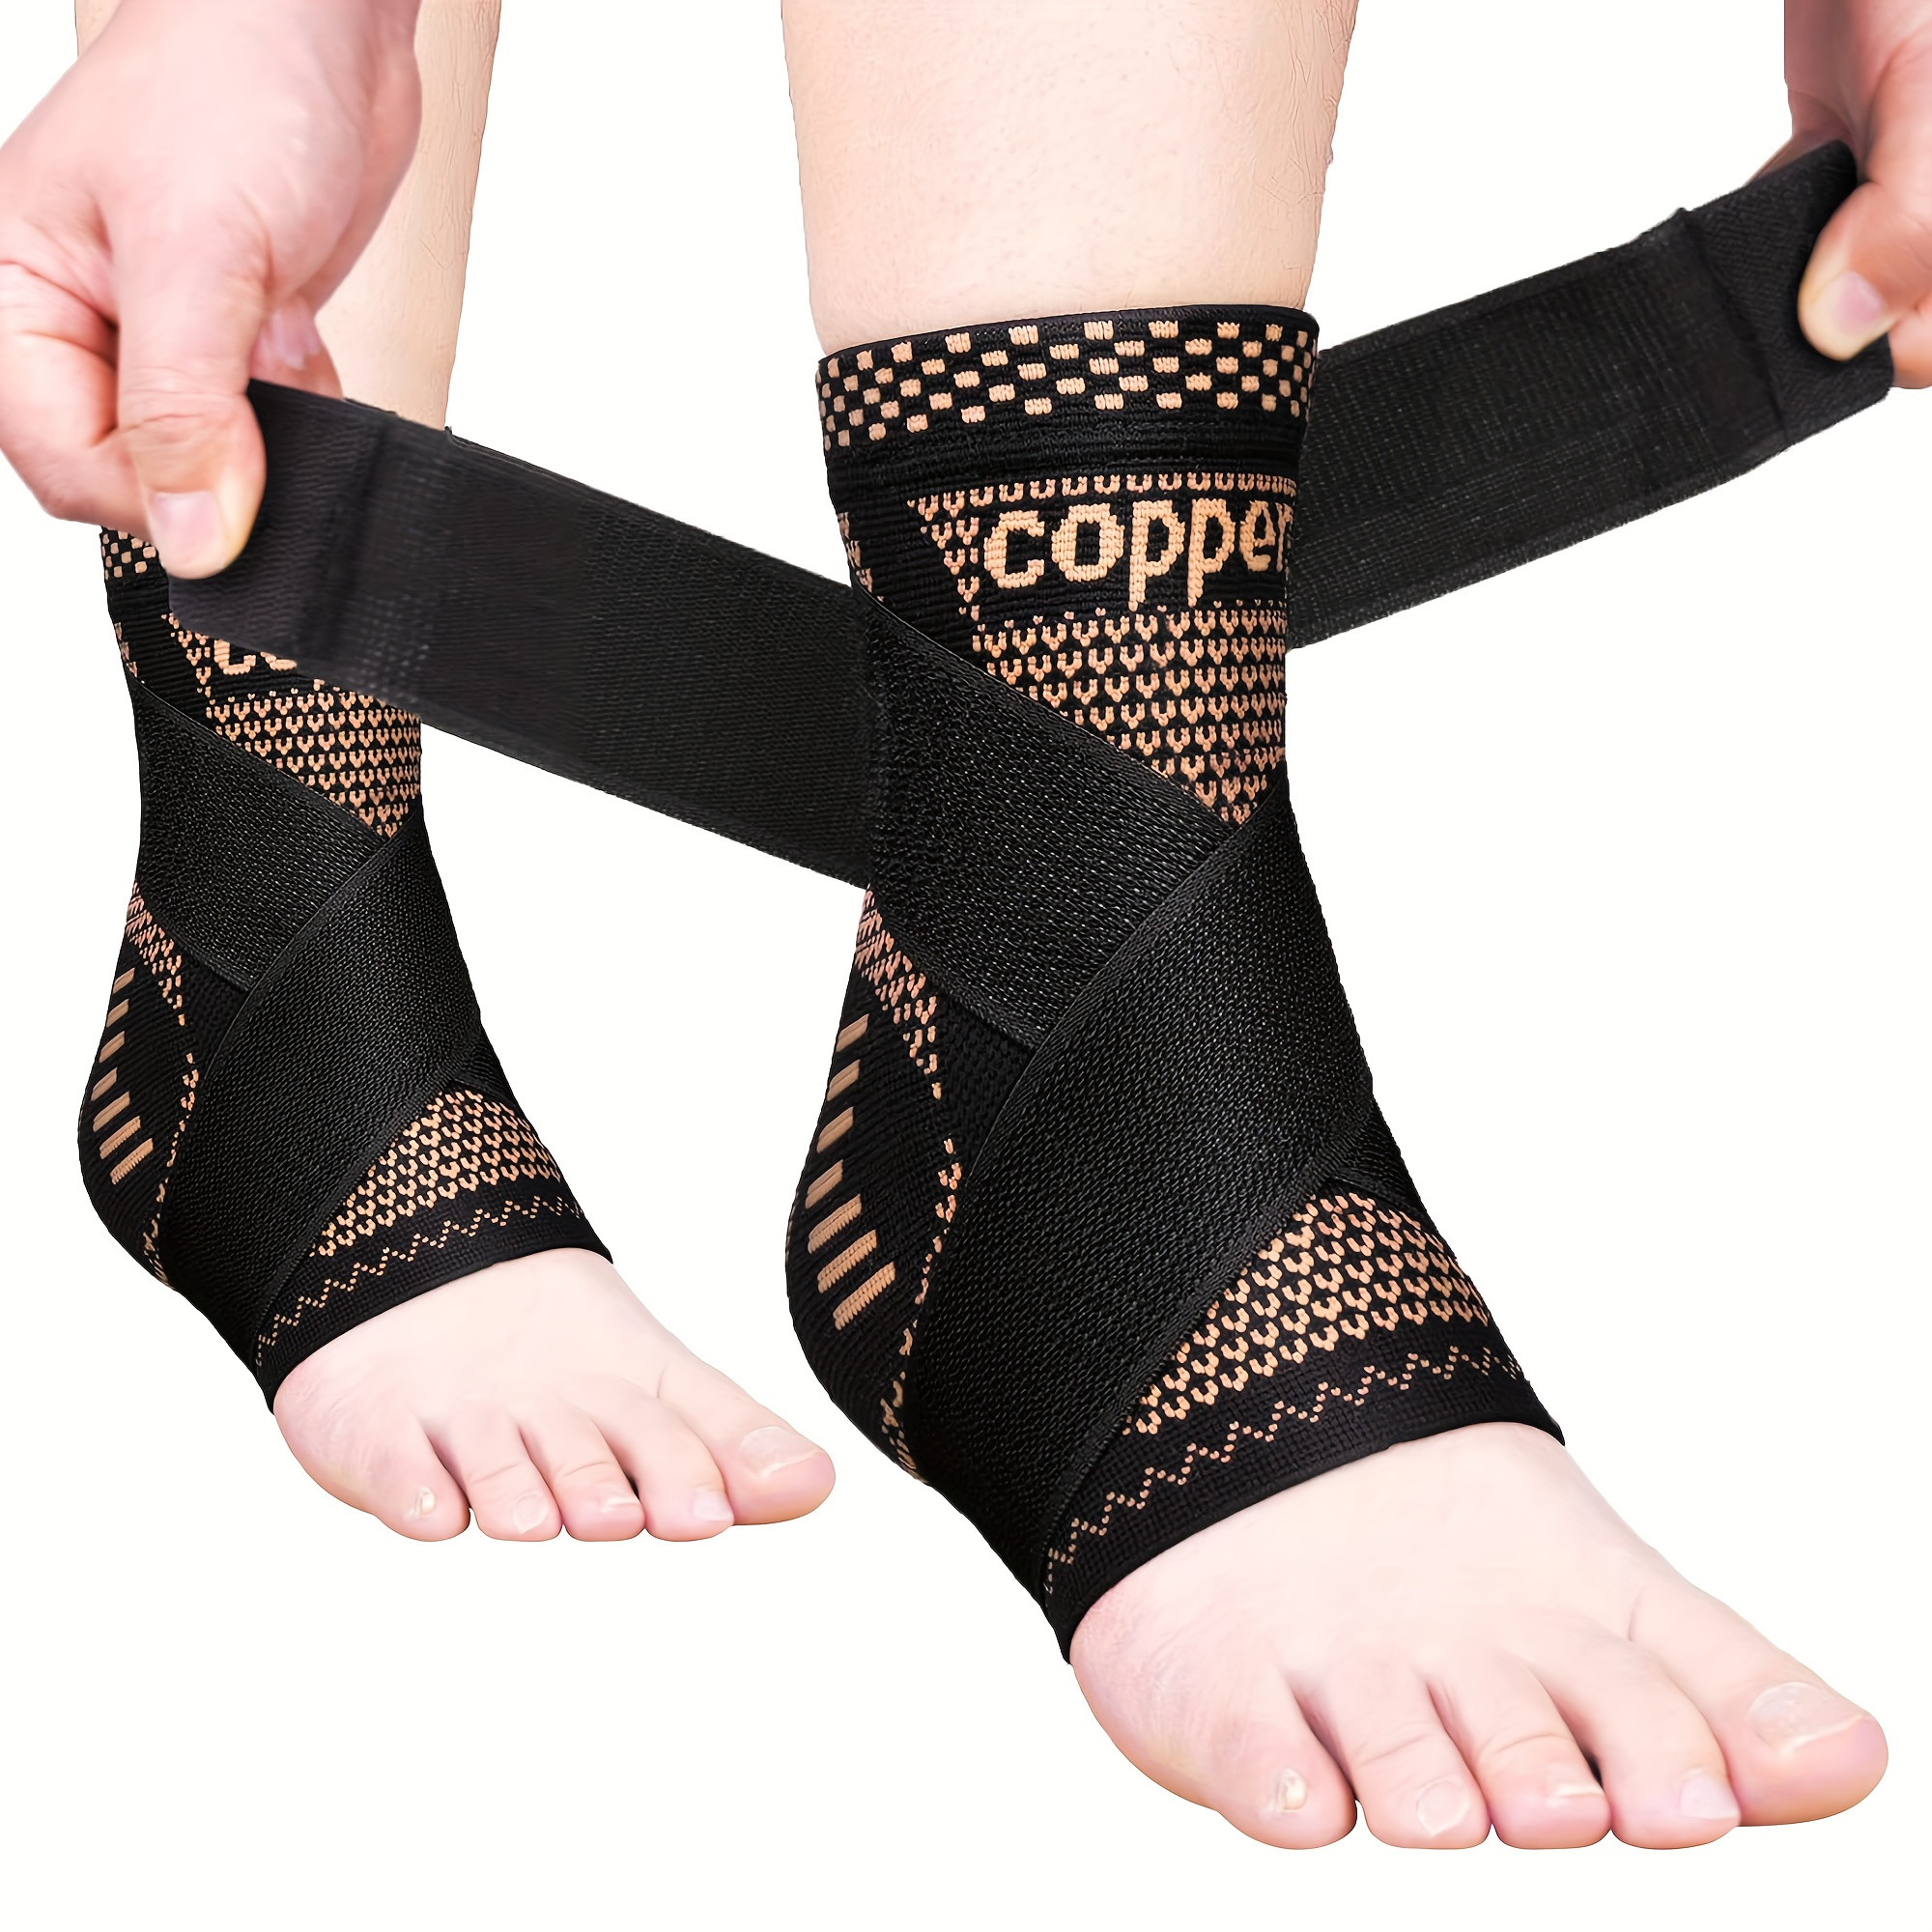 

Copper Infused Adjustable Ankle Support Braces With Detachable Strap - Compression Wrap For Men And Women, Tendon Support, Anti-sprain, Multi-sport Use, Hand Wash, Hook-and-loop Closure - Pair